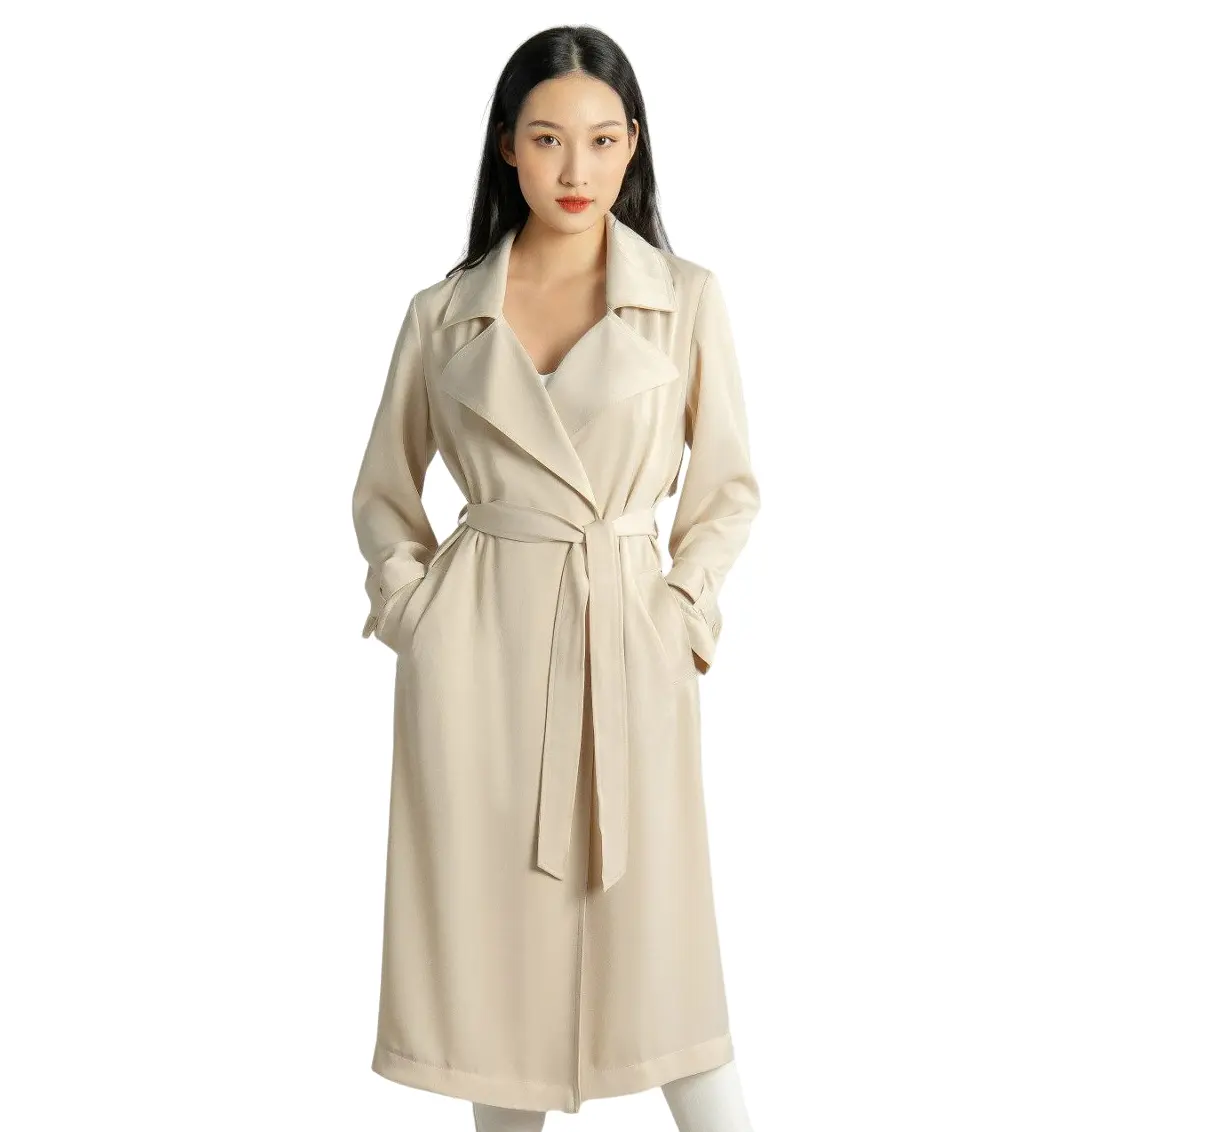 WINTER COLLECTION FOR YOUNG WOMEN - NAM&CO SATIN CHIC LONG MAXI TRENCH COAT AT FACTORY PRICE